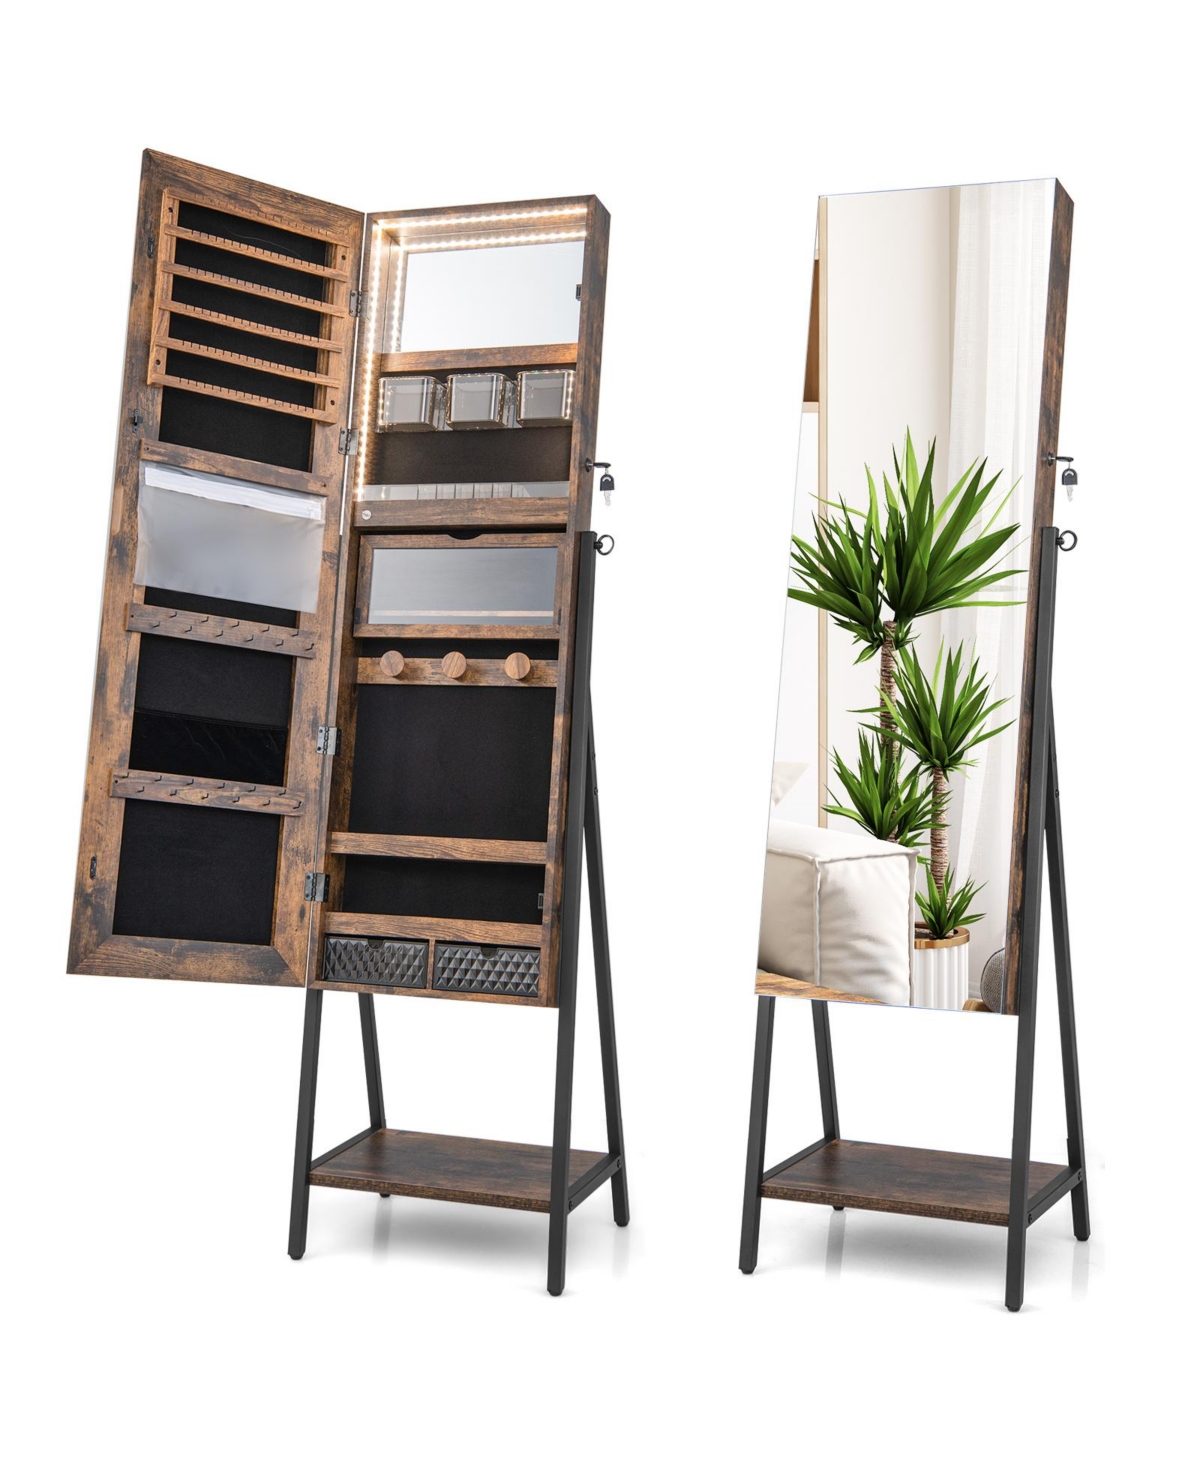 Freestanding Jewelry Cabinet with Full-Length Mirror - Brown